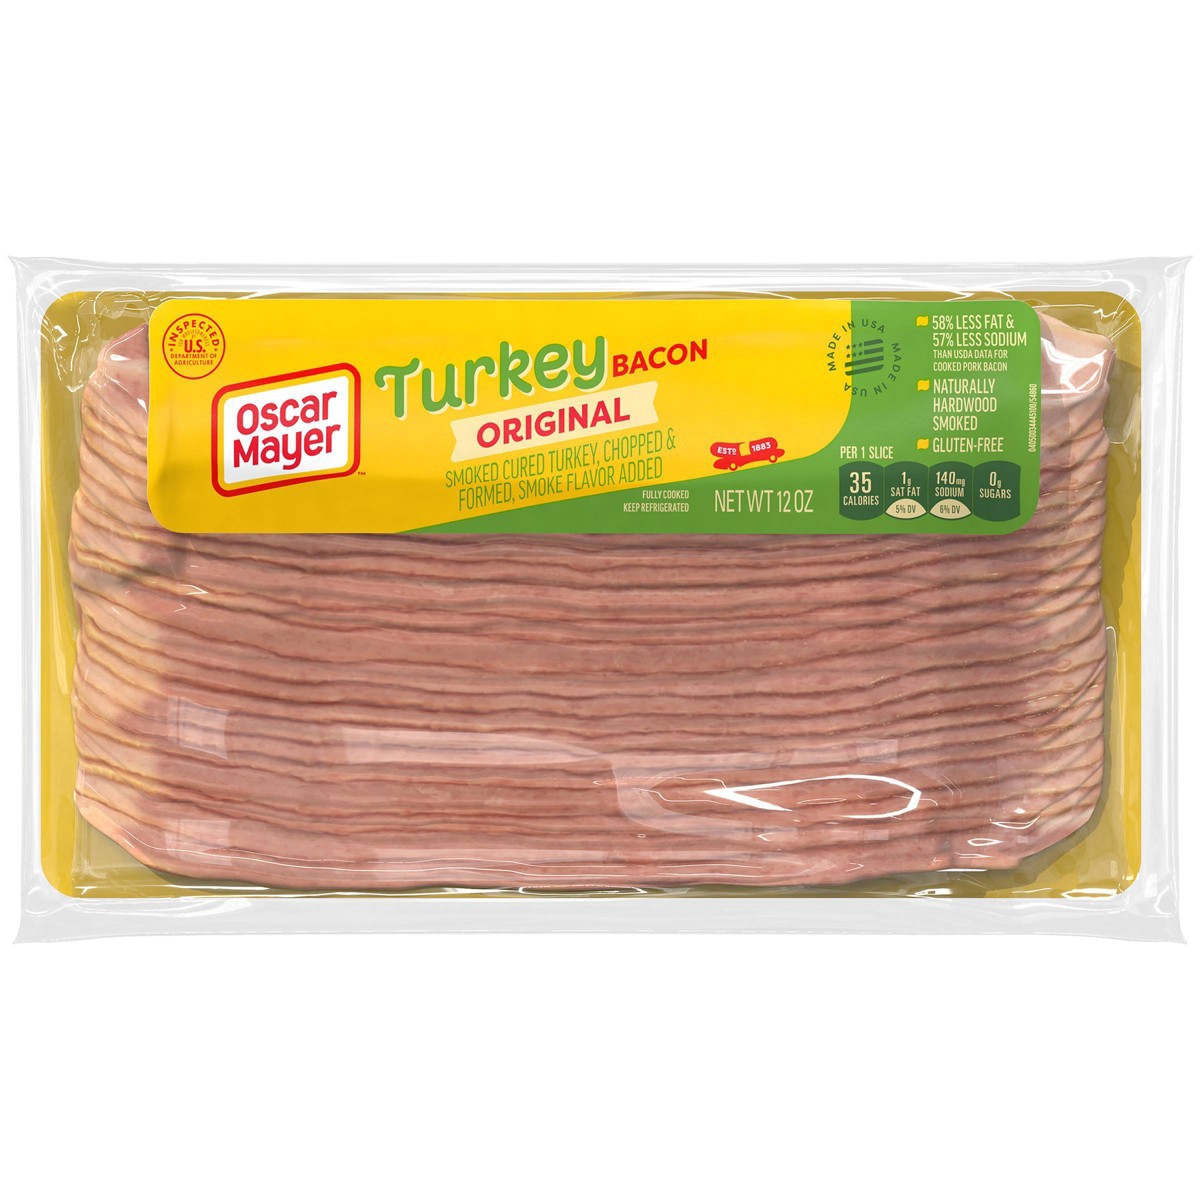 slide 9 of 20, Oscar Mayer Fully Cooked & Gluten Free Turkey Bacon with 58% Less Fat & 57% Less Sodium Pack, 21-23 slices, 12 oz